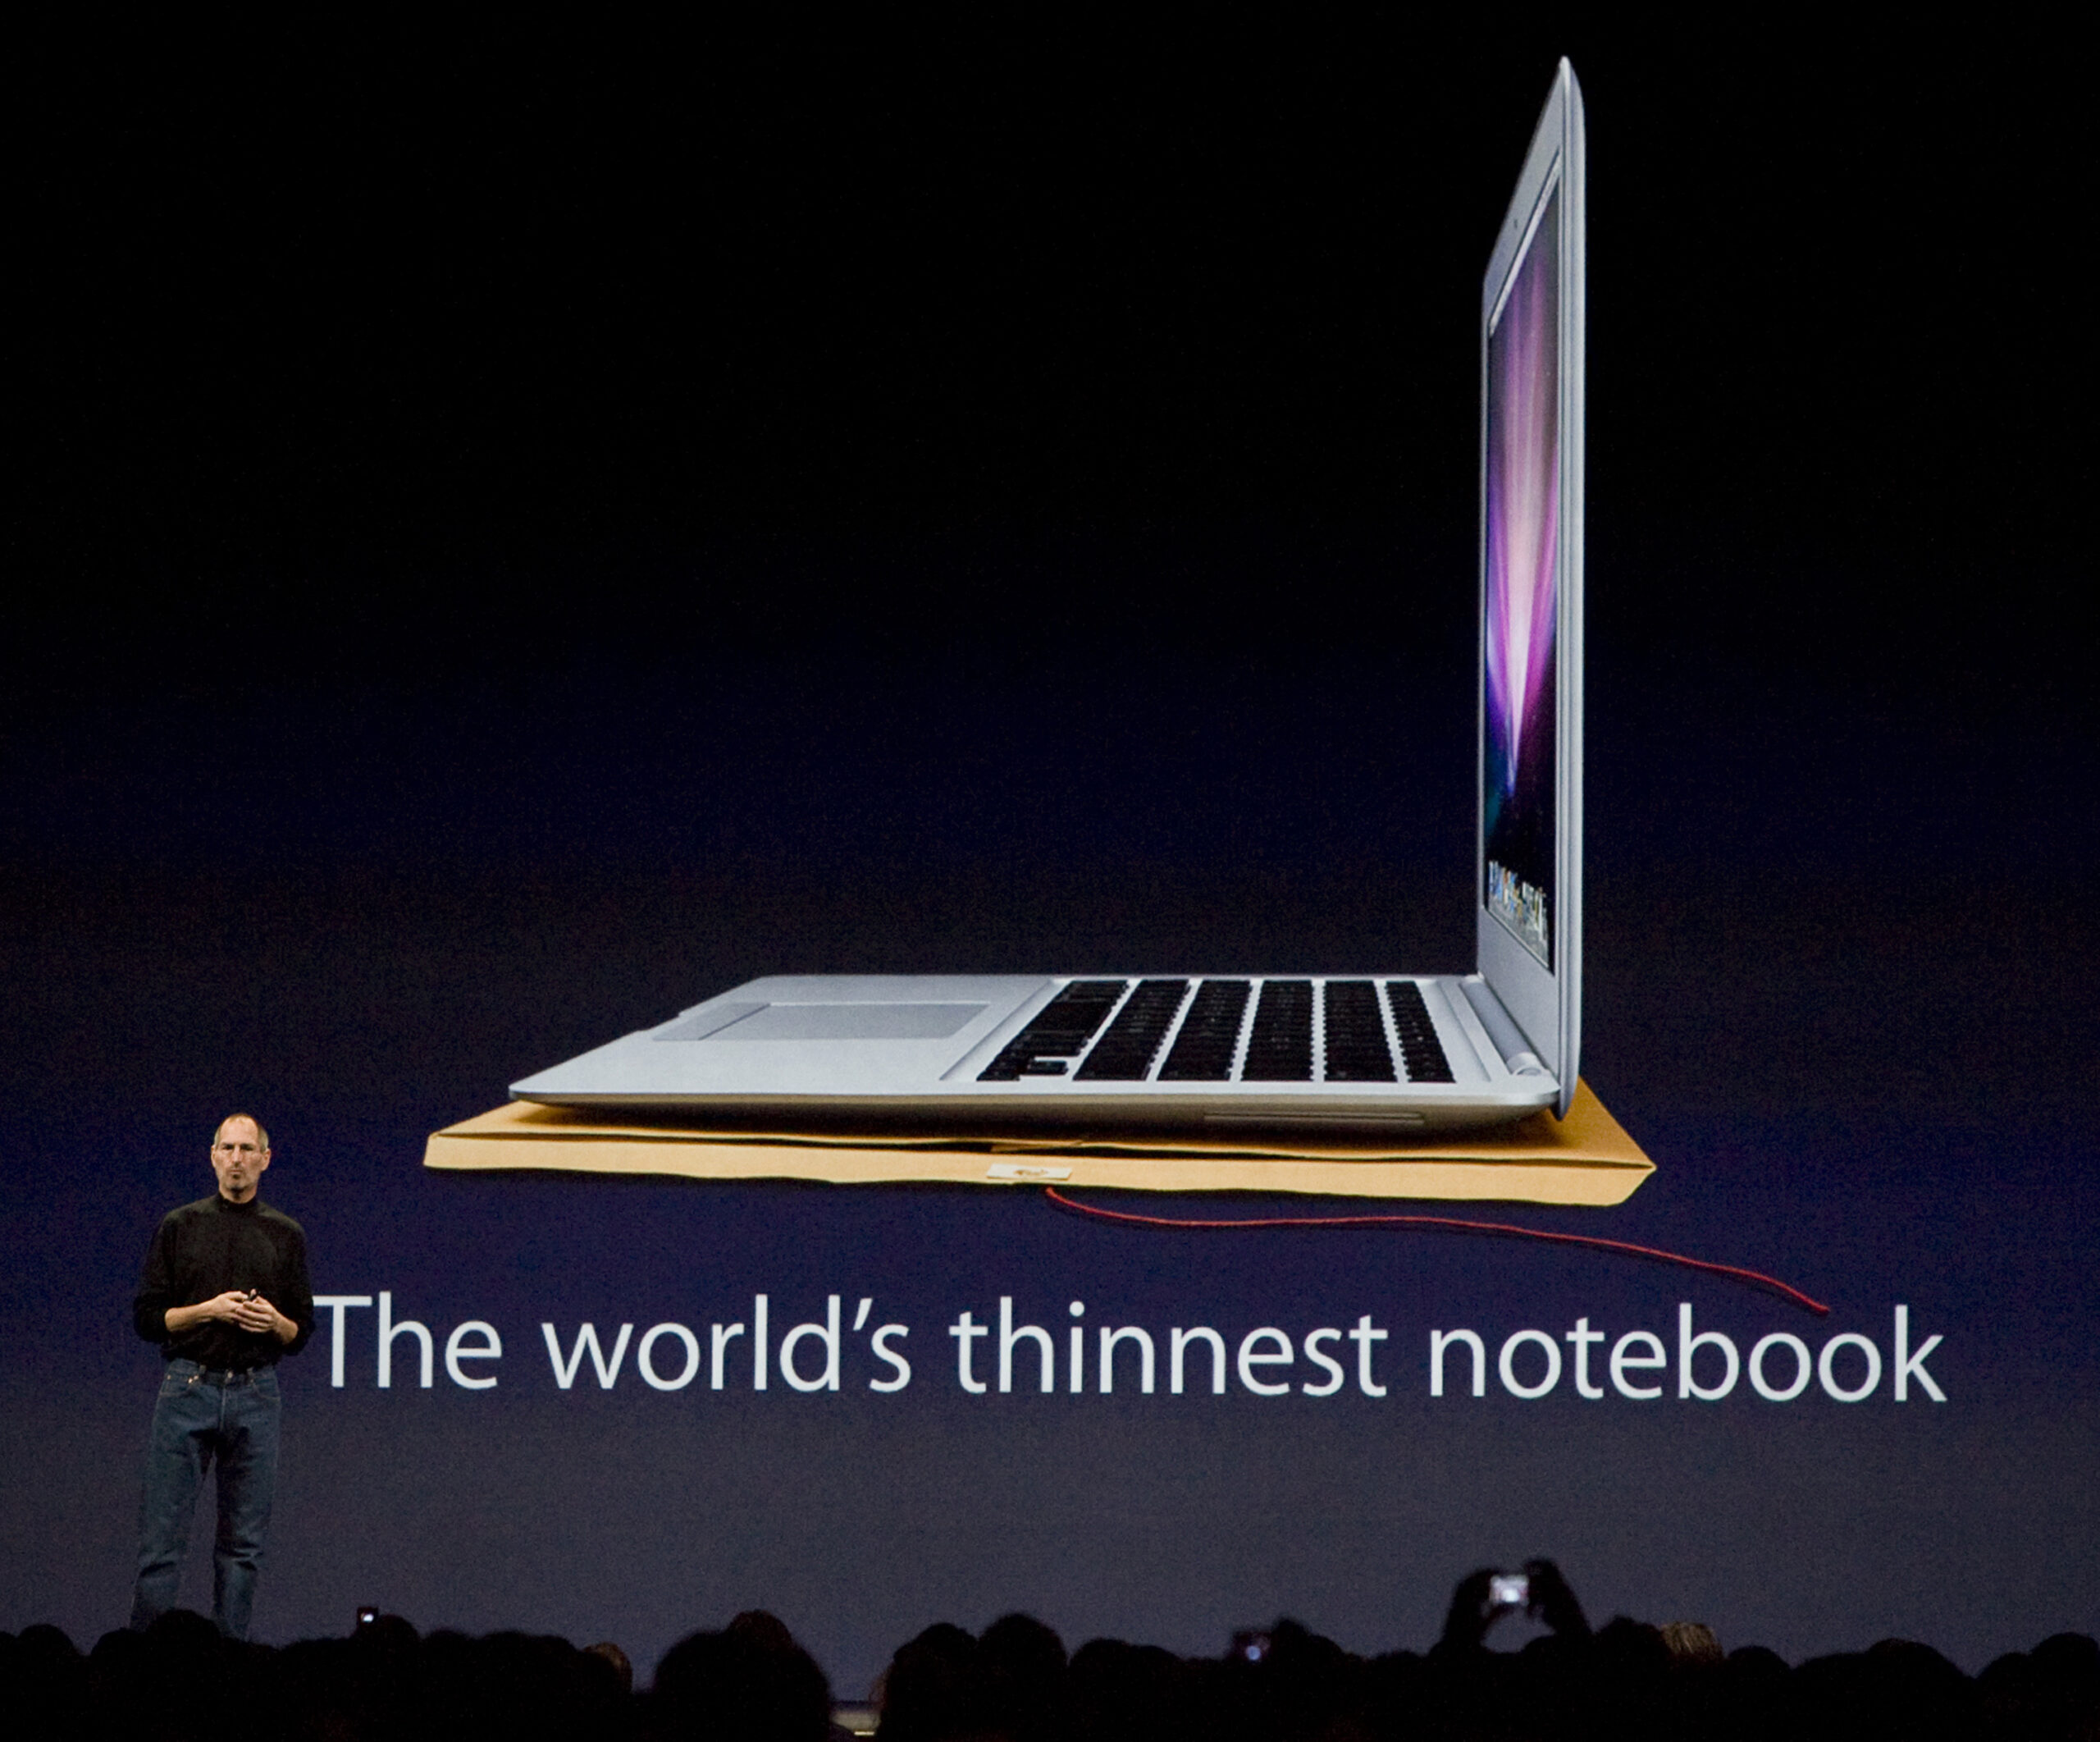 Apple CEO Steve Jobs stands in front of a screen with a picture of an Apple Macbook laptop with the text "The world's thinnest notebook" below it.